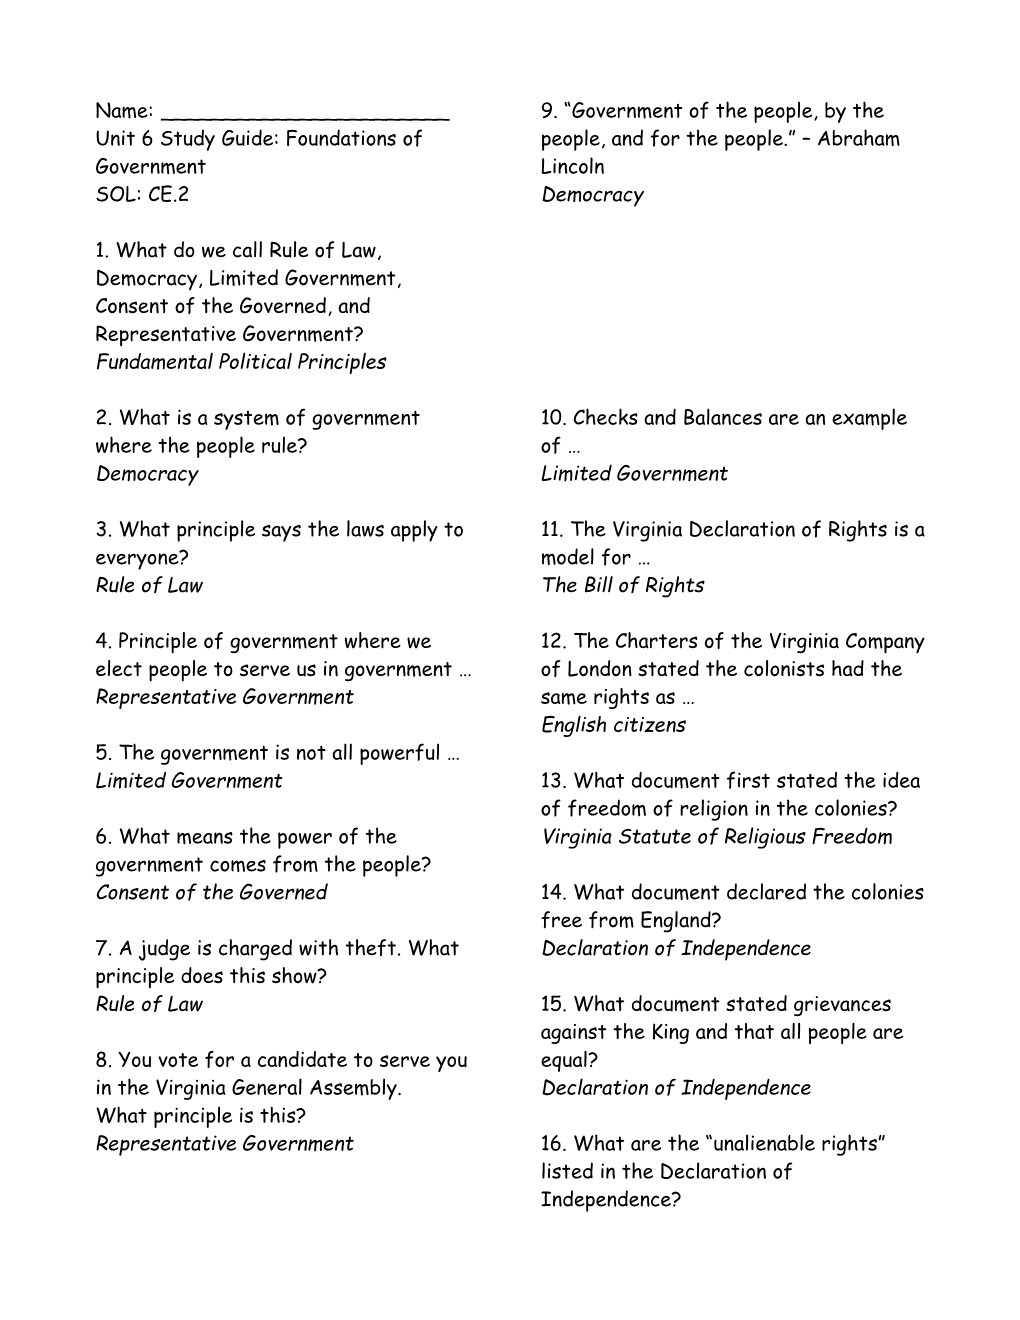 Unit 6 Study Guide:Foundations of Government